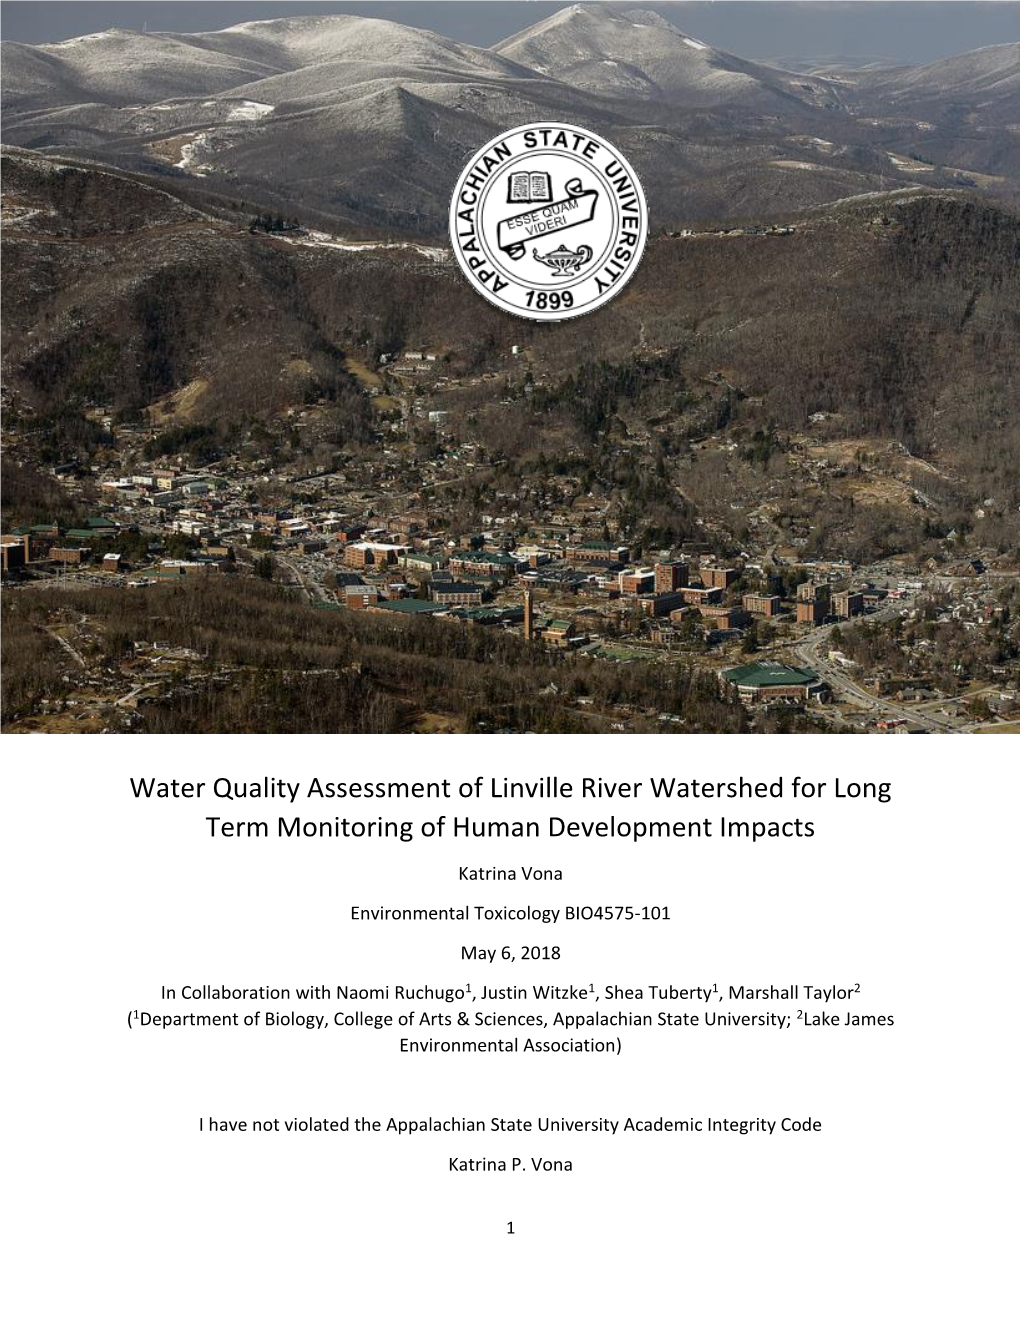 Water Quality Assessment of Linville River Watershed for Long Term Monitoring of Human Development Impacts